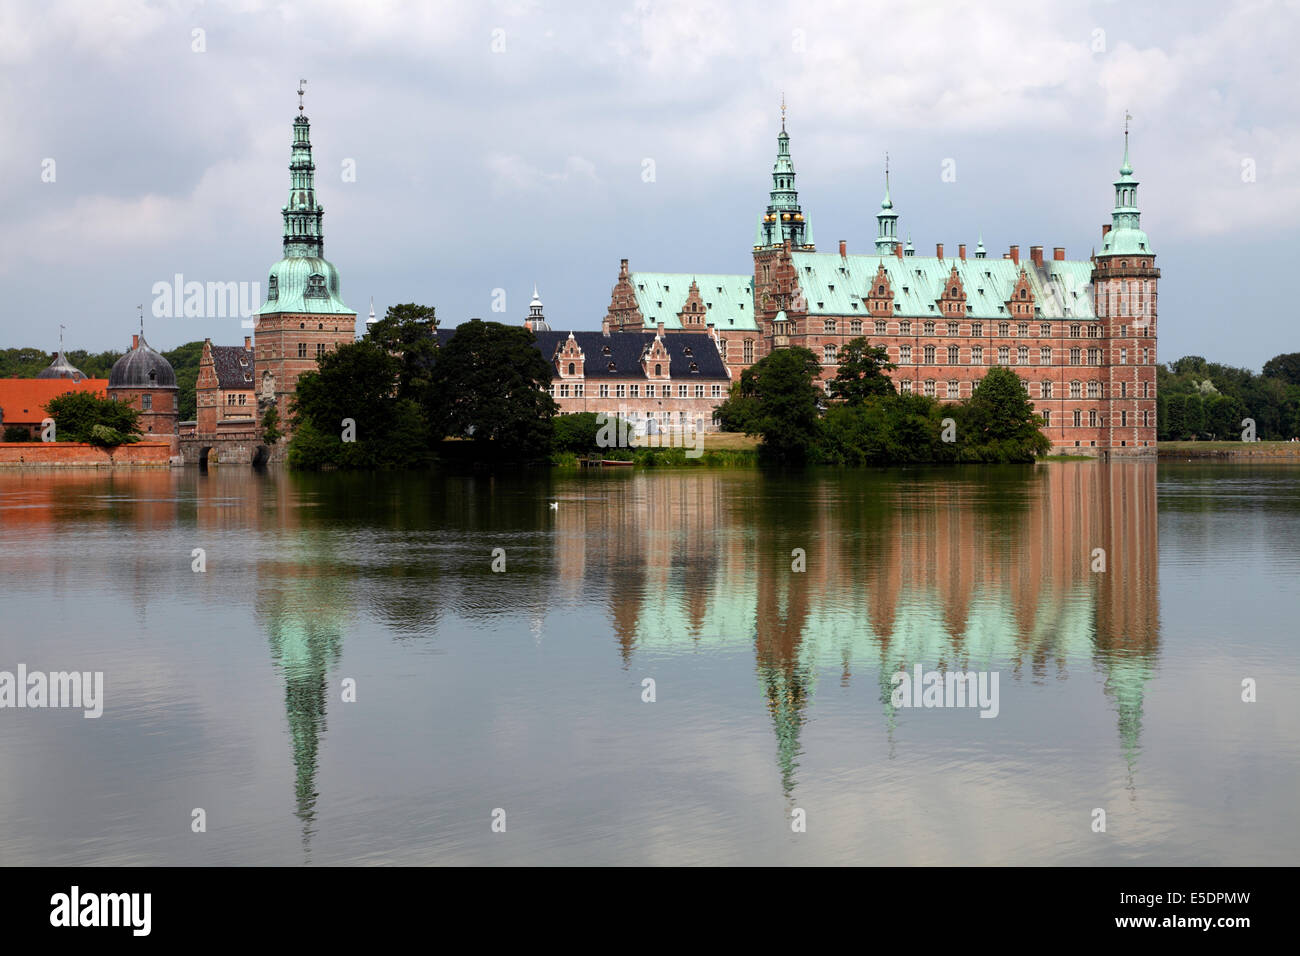 Frederiksborg Castle seen from the opposite bank of the Castle Lake Stock Photo